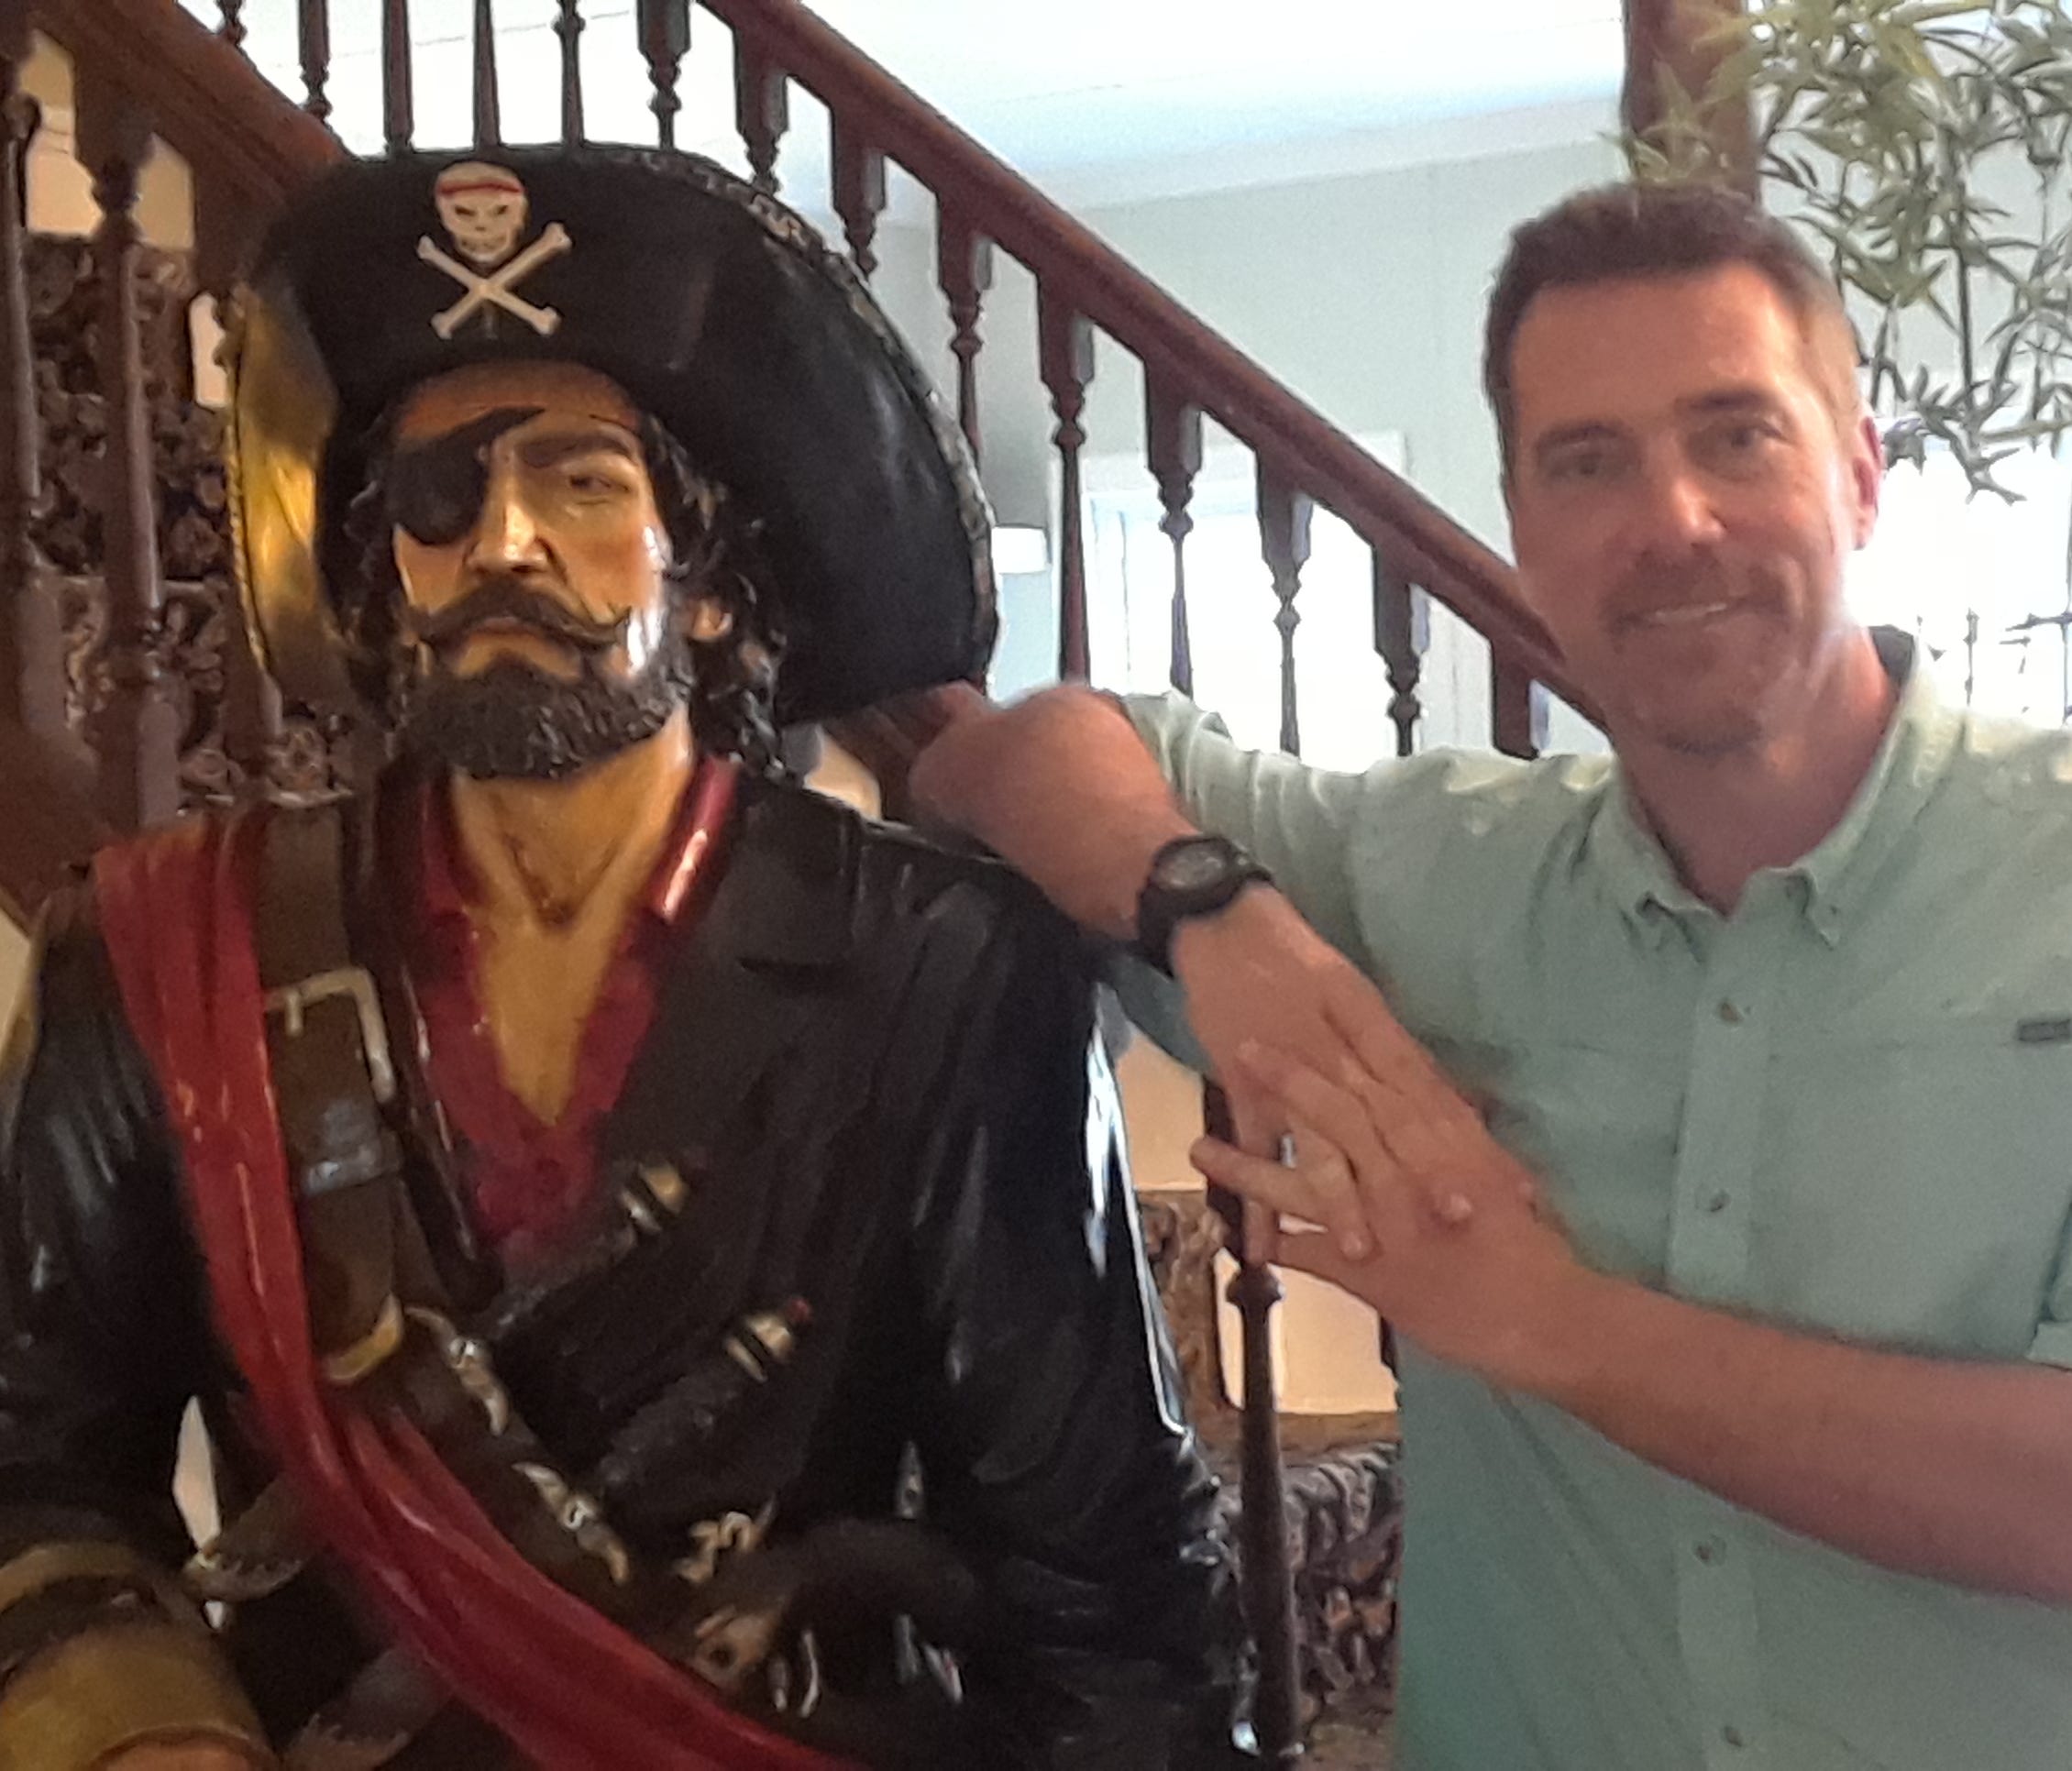 Chip Stevens has a life-size statue of a Blackbeard-looking pirate in the lobby of his inn. Guests frequently ask what happened to Blackbeard's treasure.